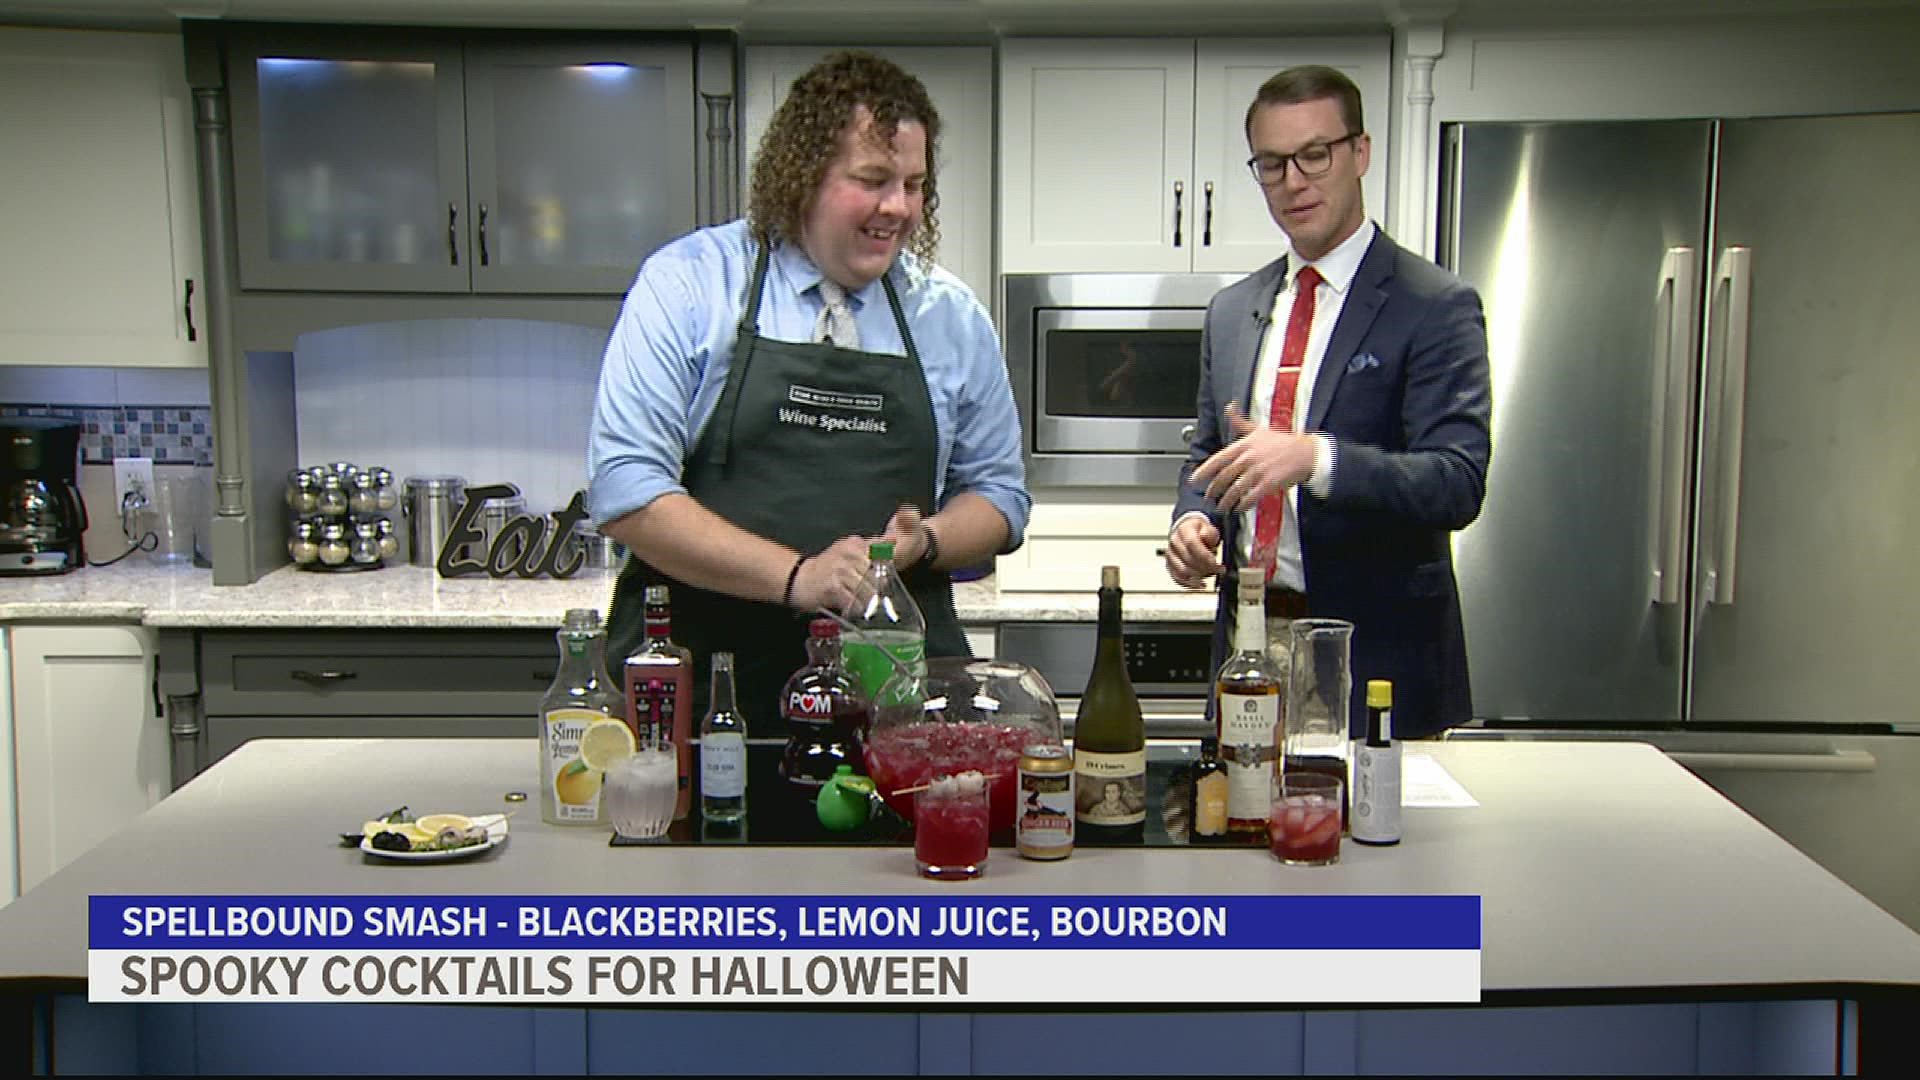 FOX43 invited Nate Snelbaker, wine specialist, to demonstrate how to mix up delicious drinks for all your upcoming Halloween festivities.